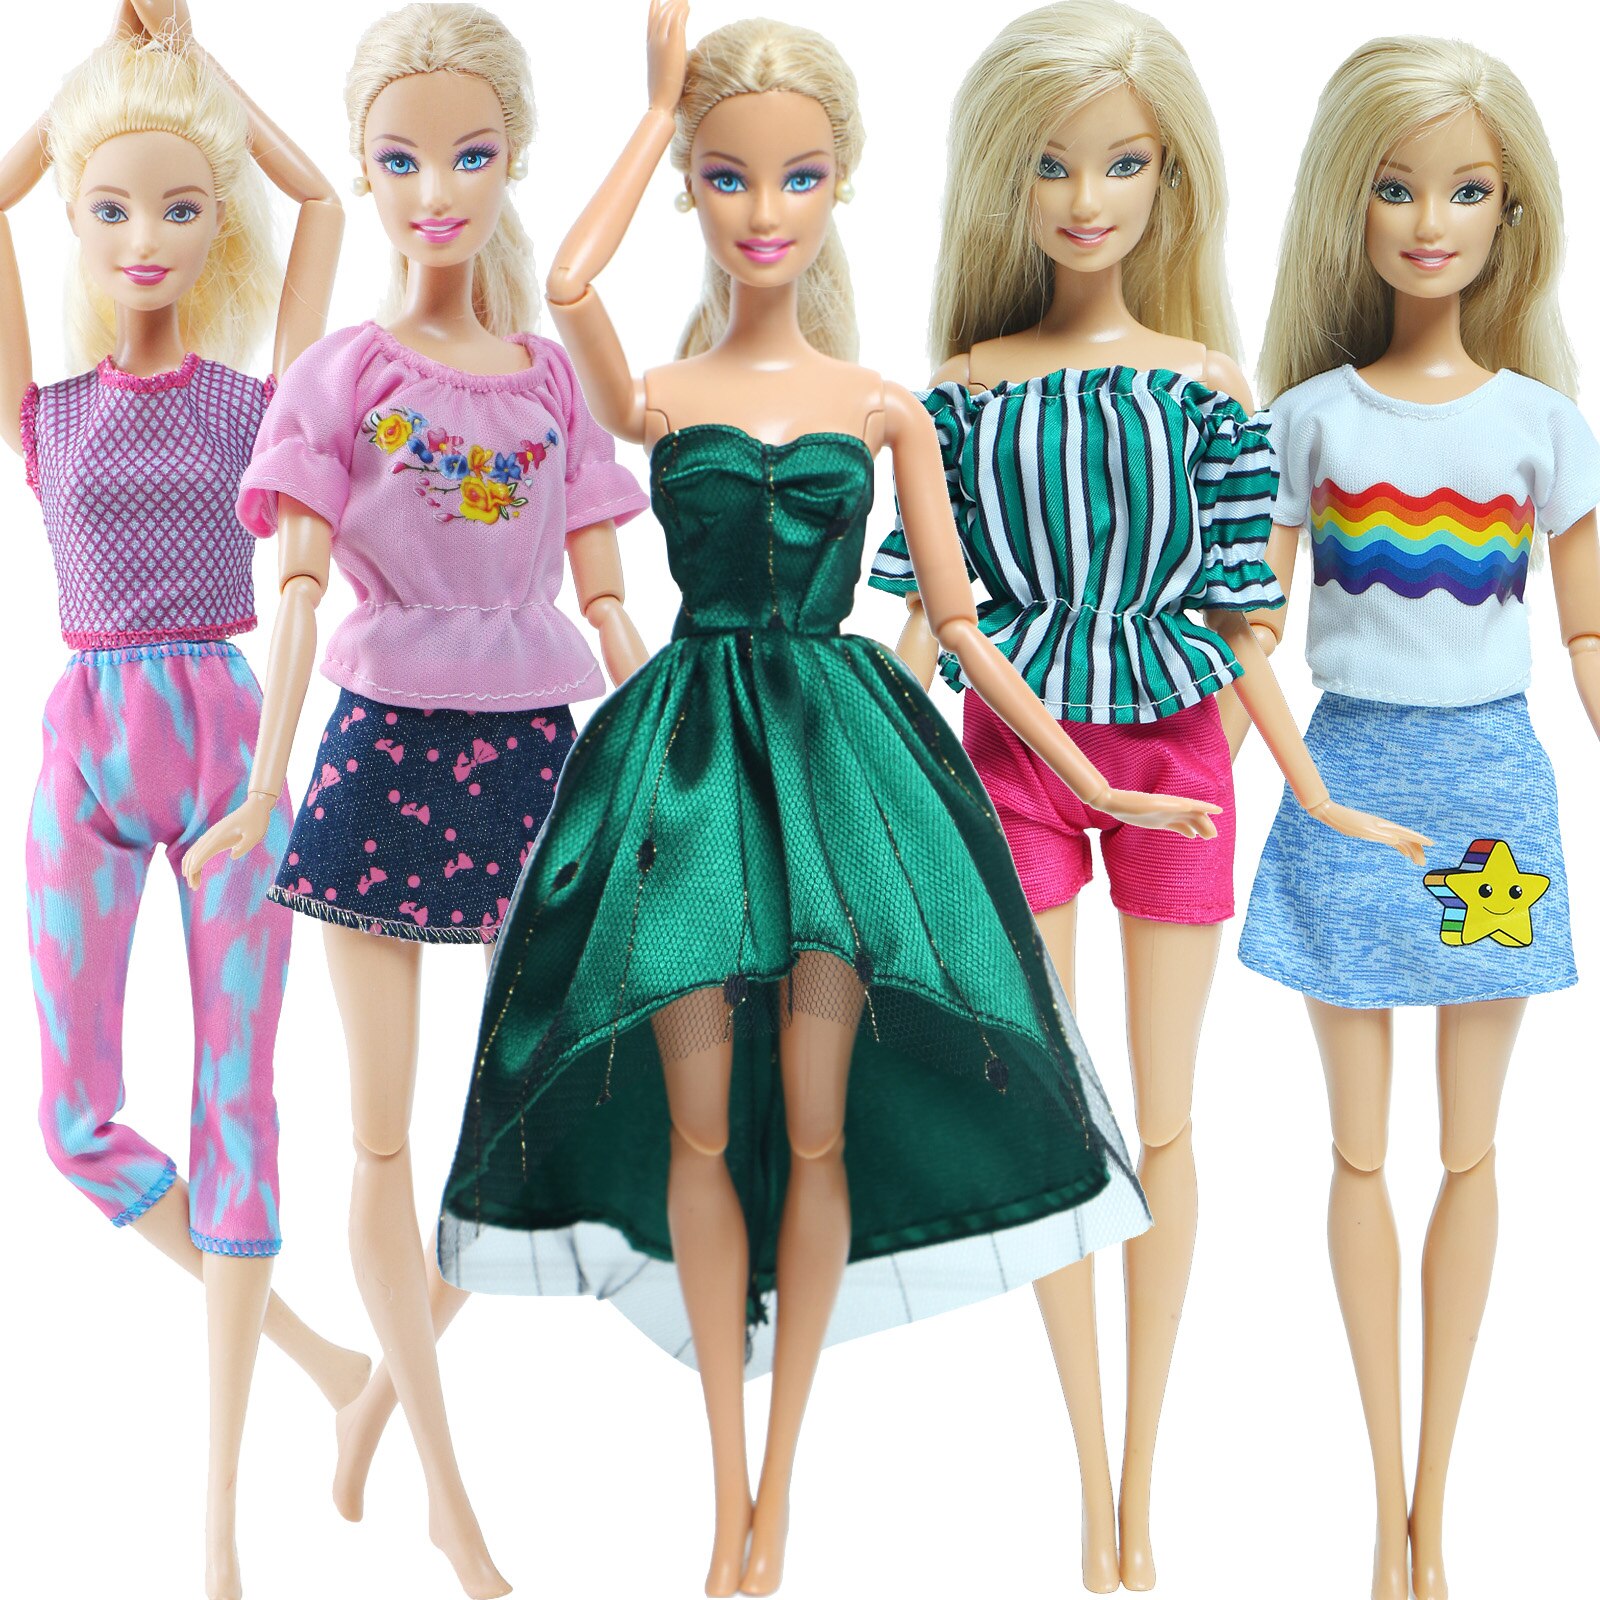 BJDBUS Wholesale 5Pcs/Lot Doll Dress Mixed T-shirt Skirt Casual Trousers  Clothes for Barbie Doll Accessories Kids Playhouse Toy